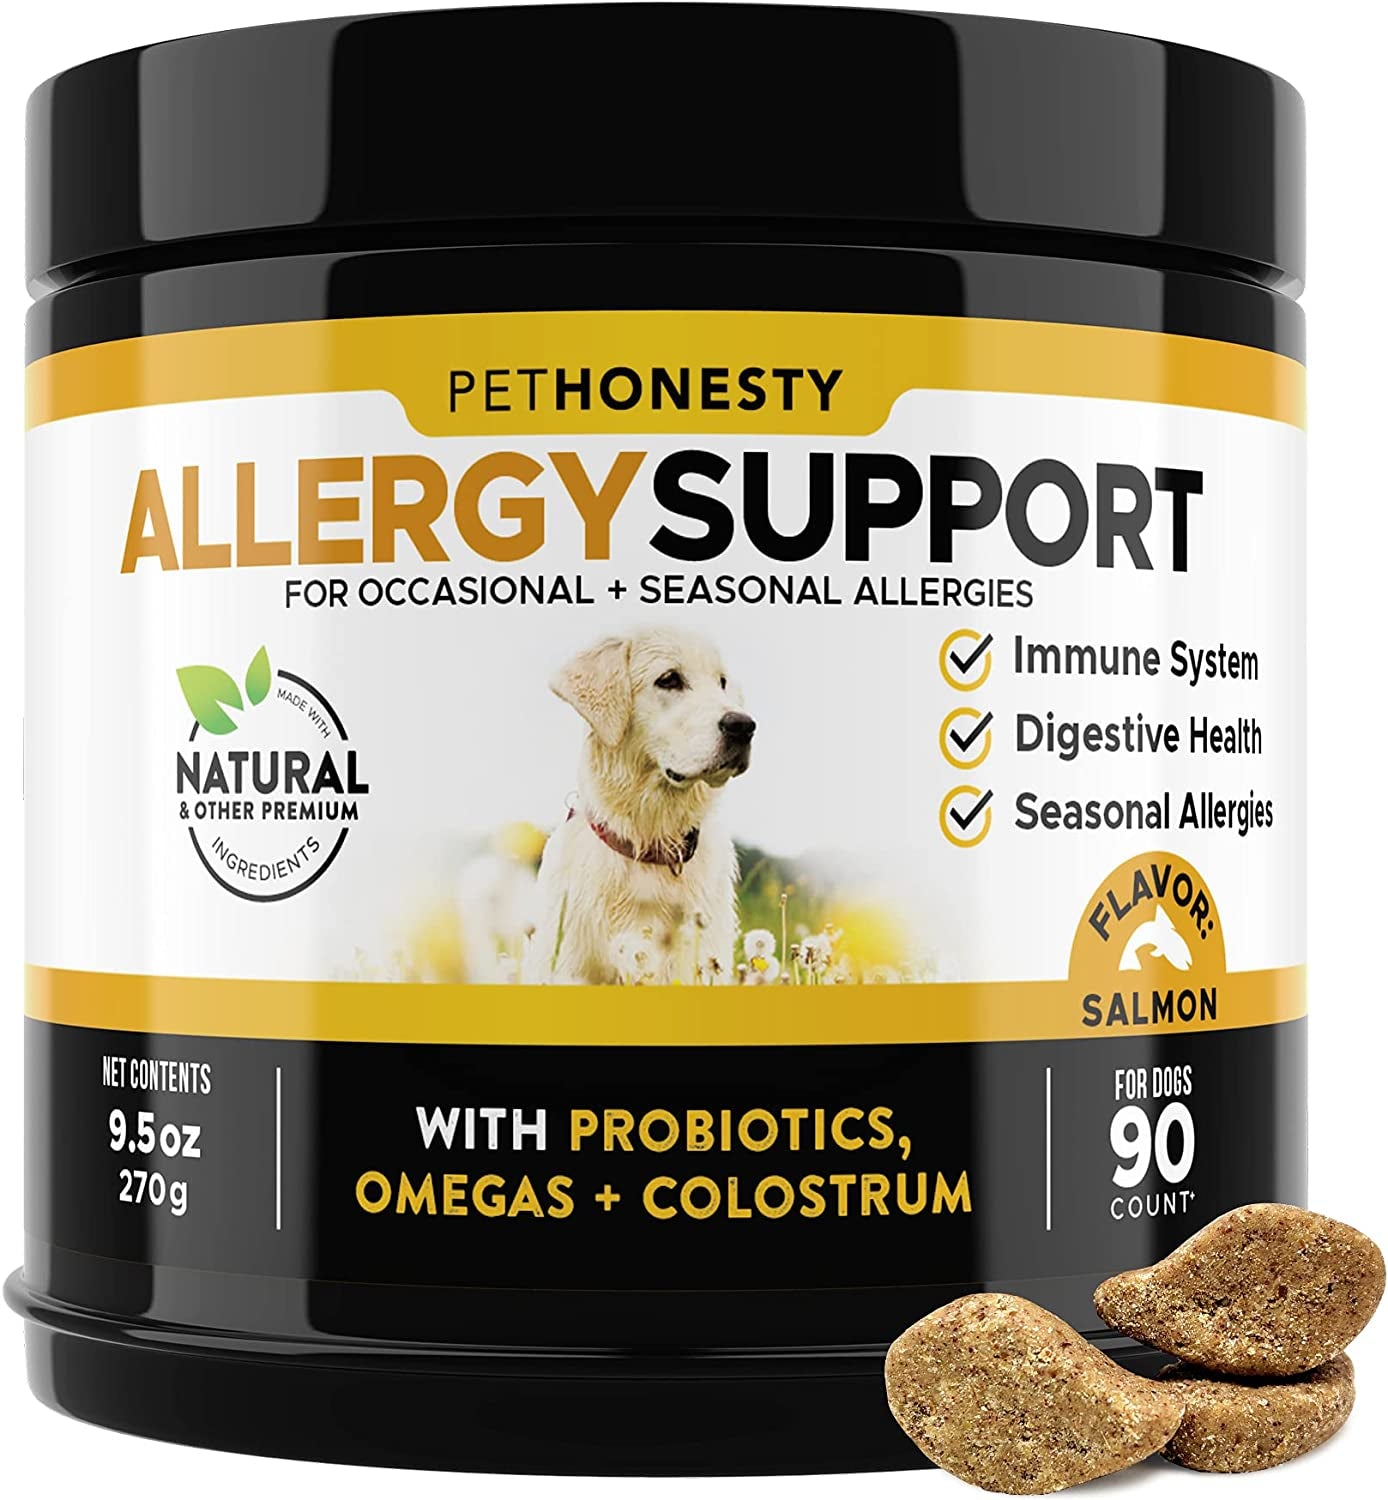 Pethonesty Dog Allergy Relief Chews, Omega 3 Salmon Fish Oil Probiotic Supplement for Anti-Itch, Hot Spots, and Seasonal Allergies (Salmon)